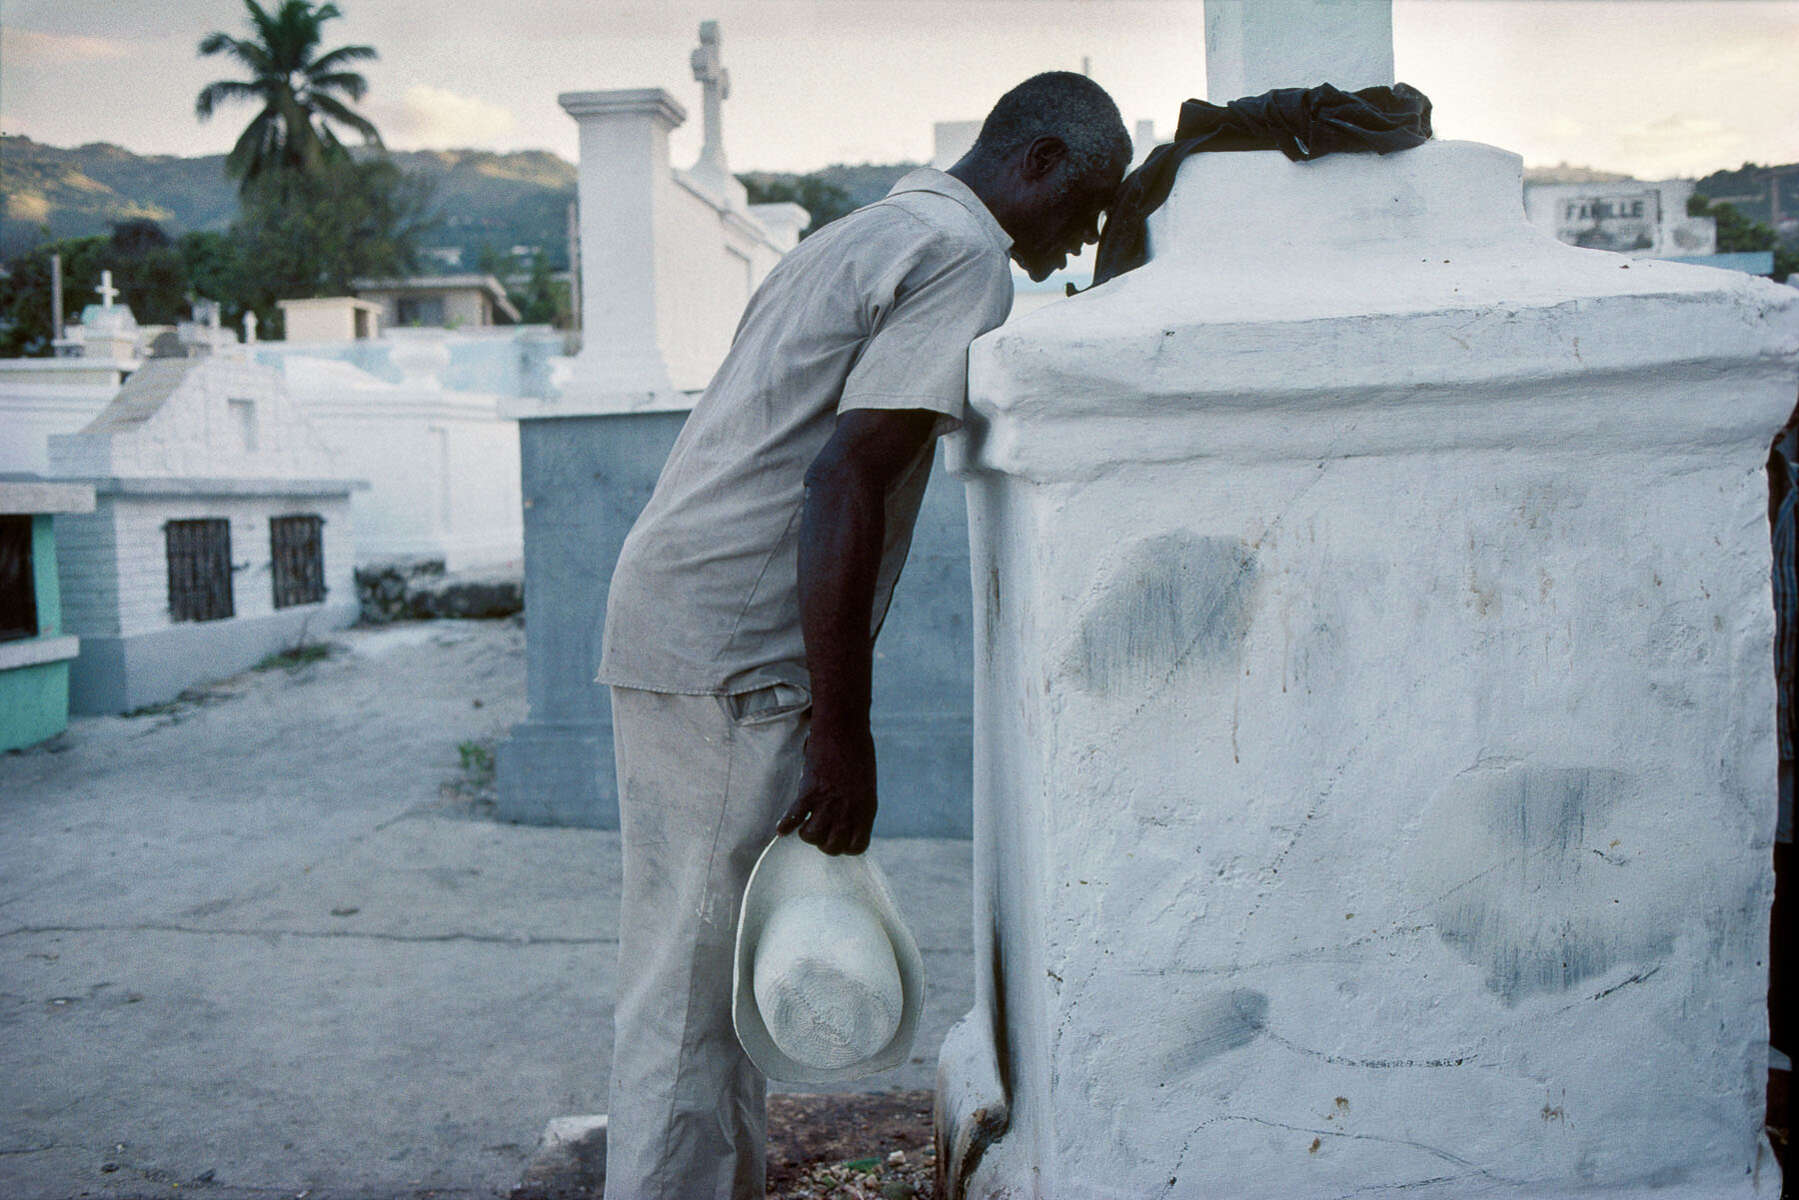 On All Saints’ Day, the Guedes celebration. The voodoo followers gather in the cemeteries around the Cross of Baron Samedi, loa (spirit) of the dead in November 1995